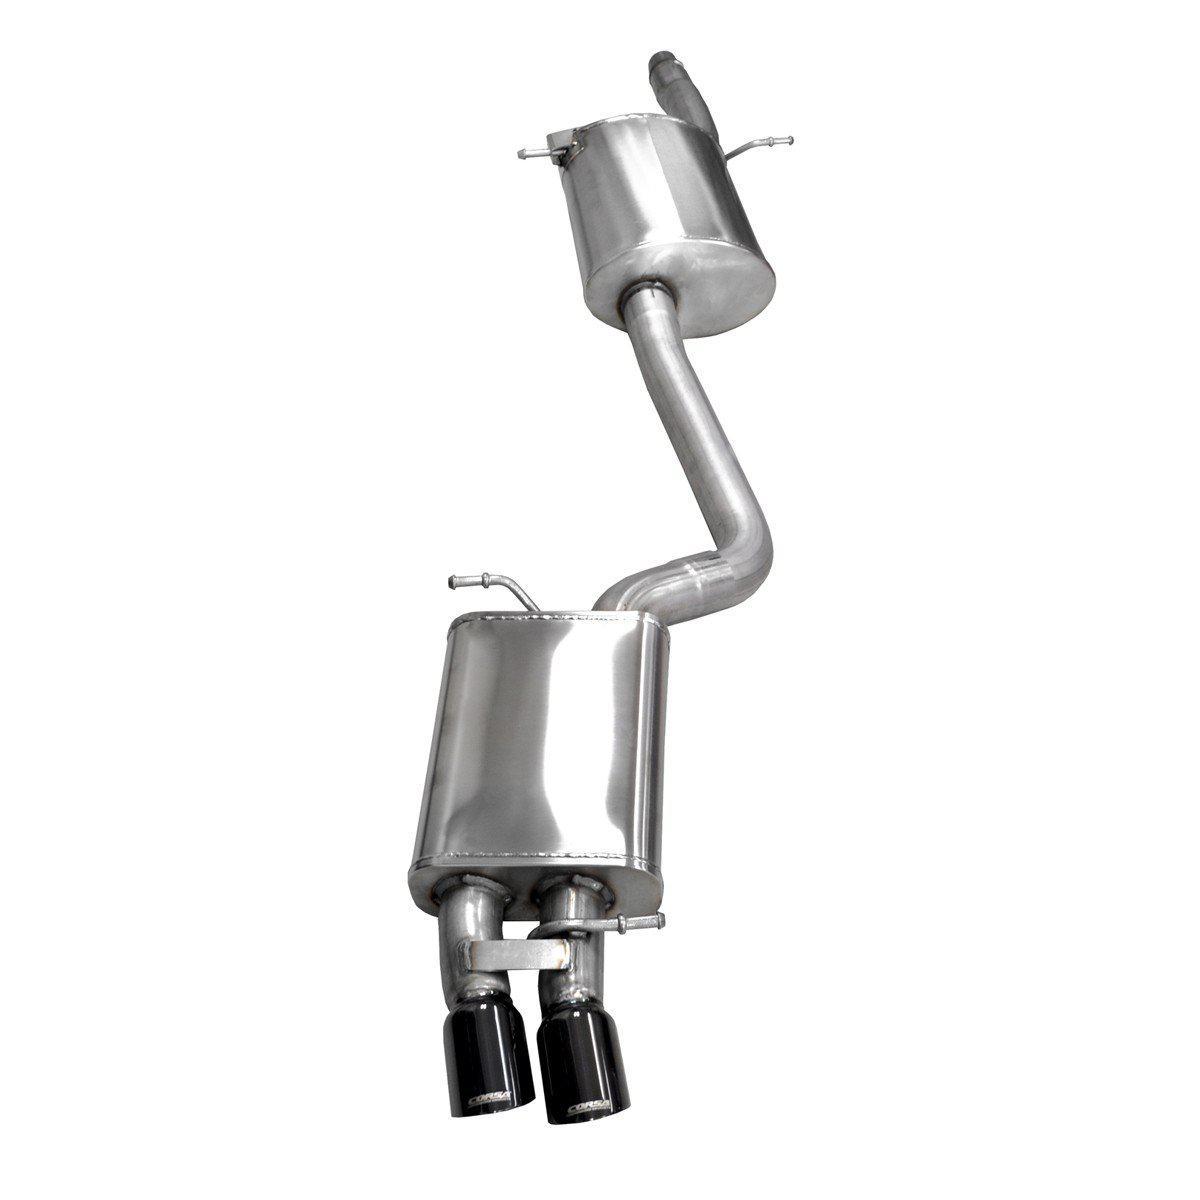 Corsa Performance B8 Audi A4 2.0T Cat-Back Exhaust System-A Little Tuning Co